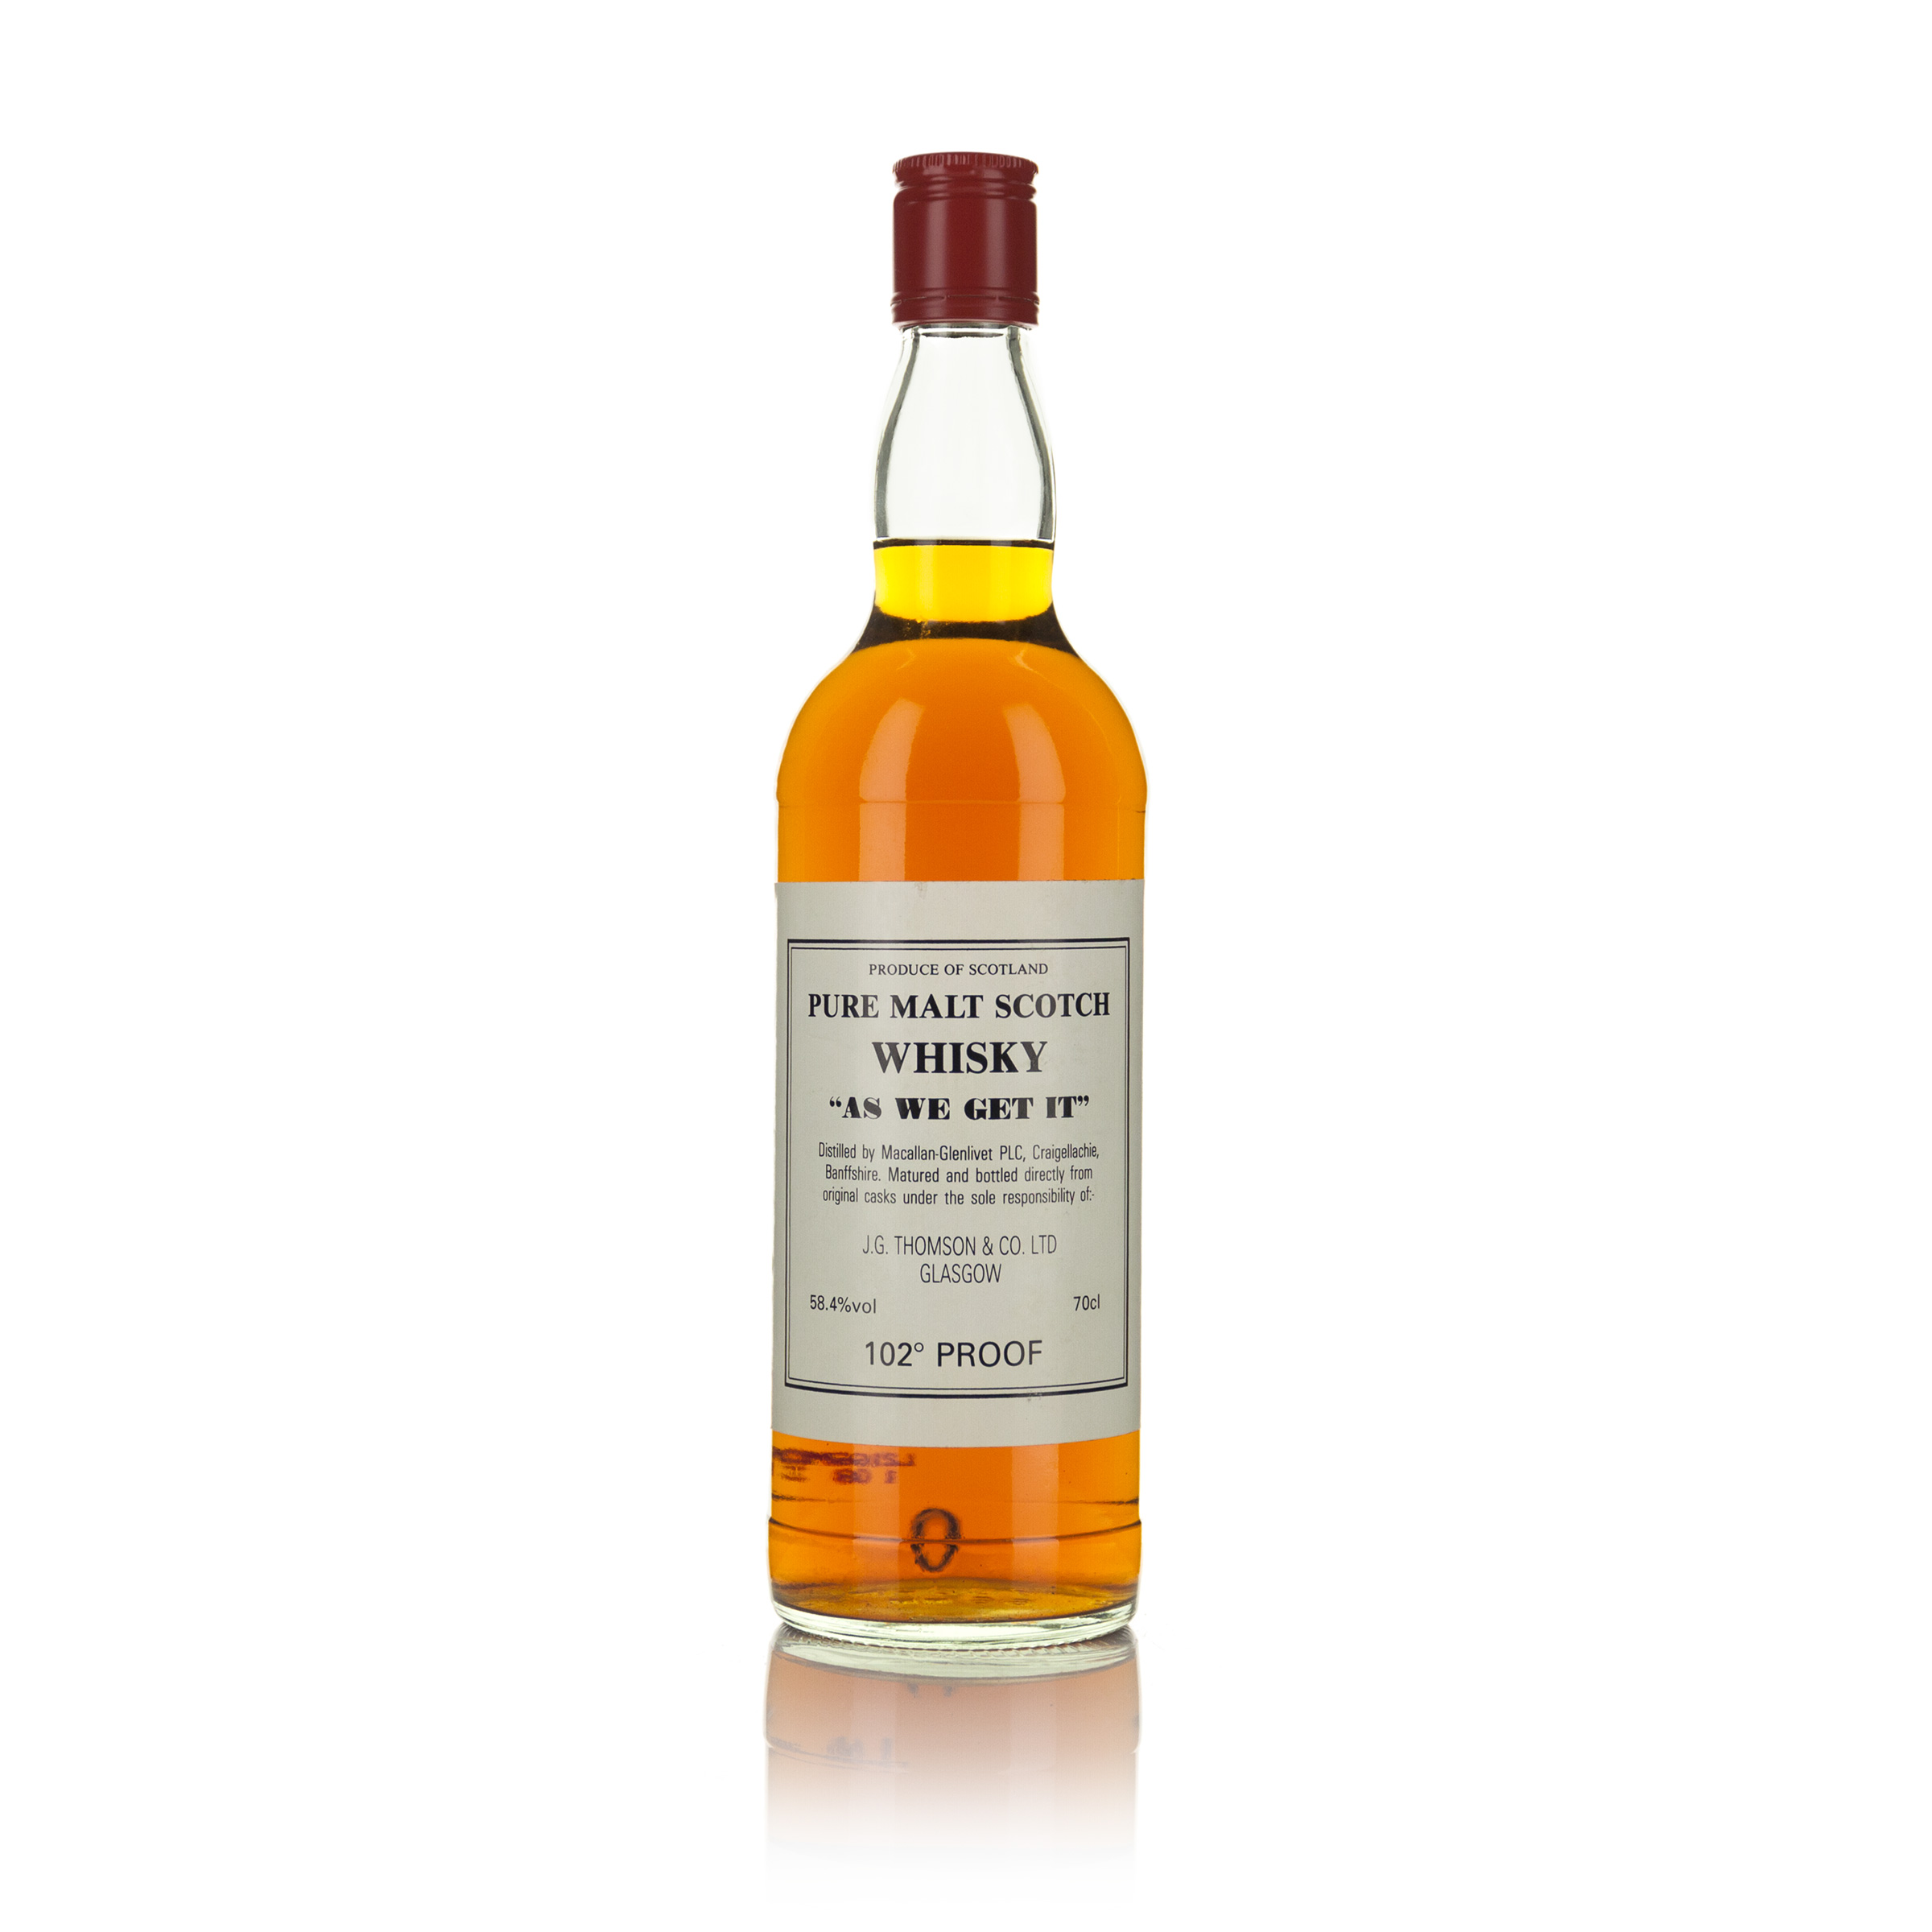 "AS WE GET IT" PURE MALT SCOTCH WHISKY (ONE 70 CL)